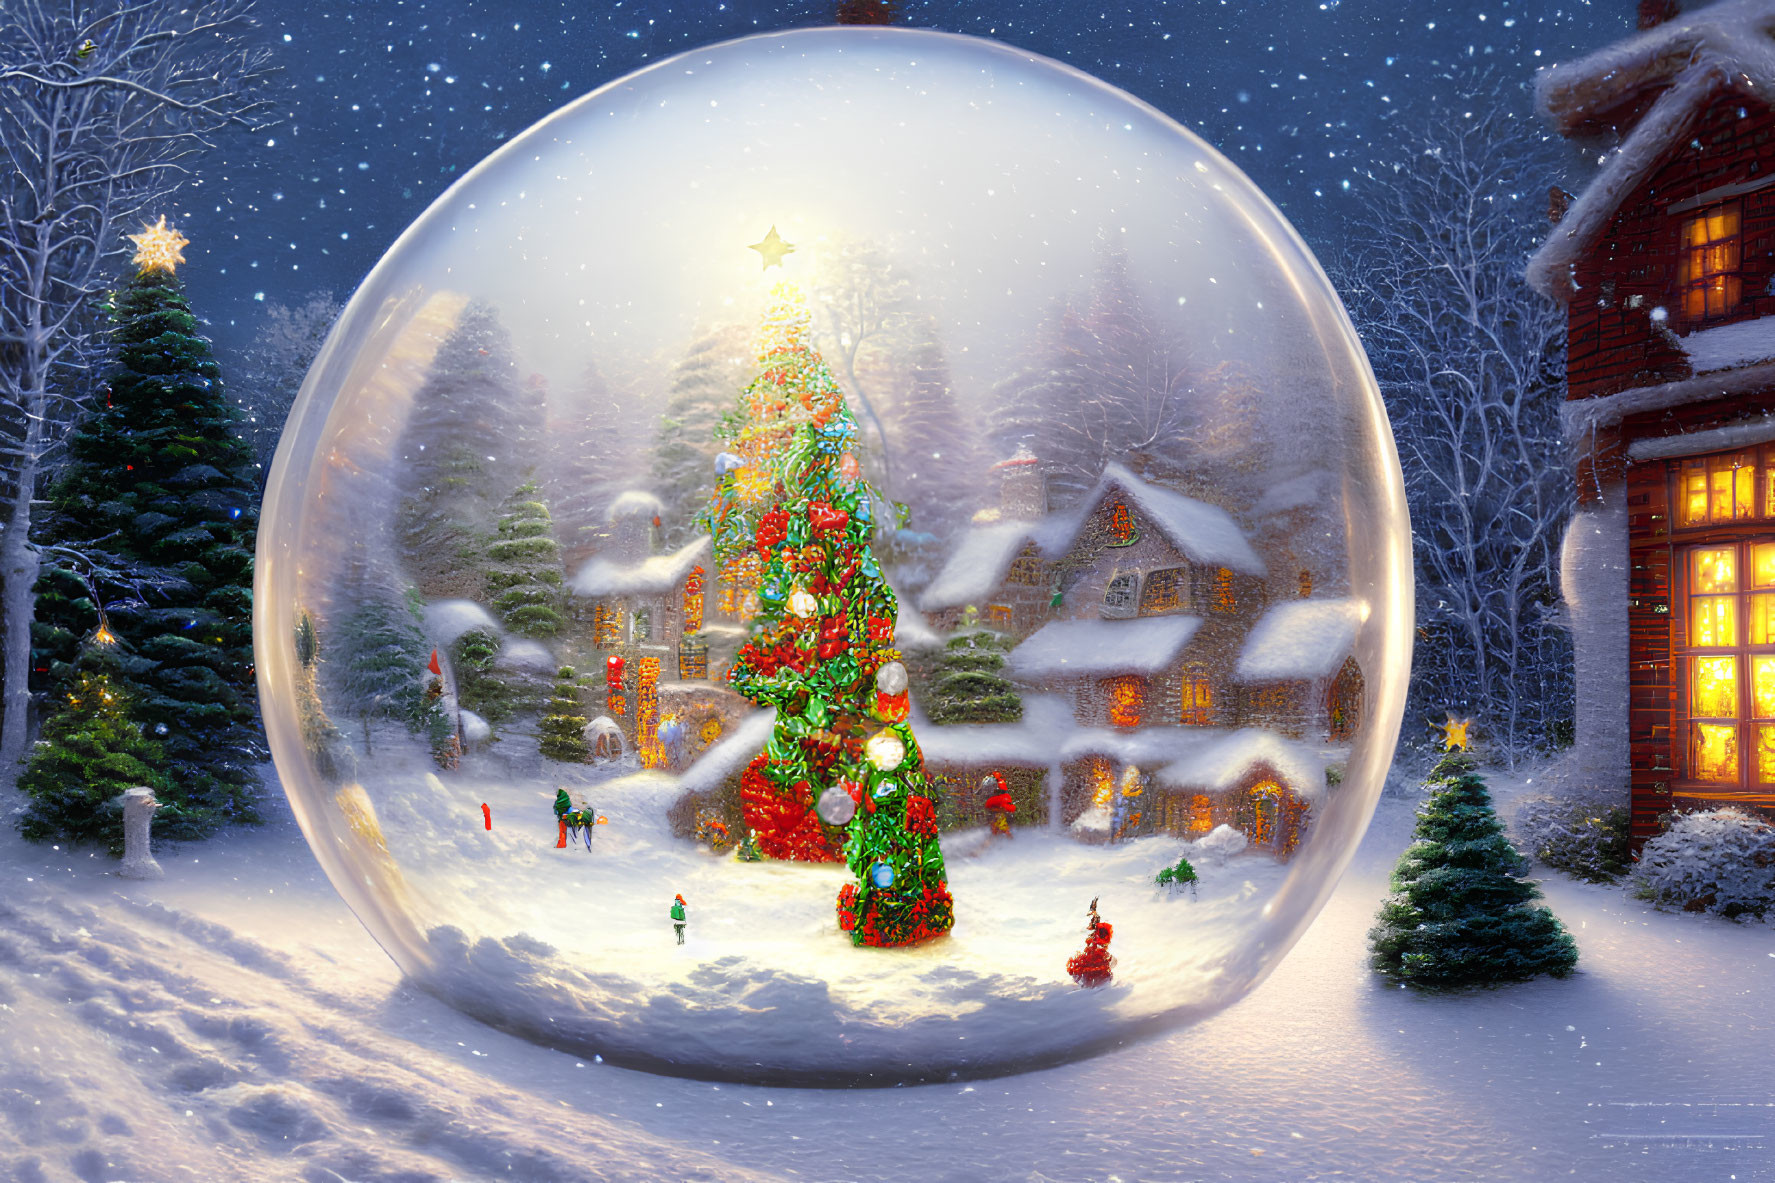 Snow globe with Christmas tree, cottages, and figures in snowy night scene